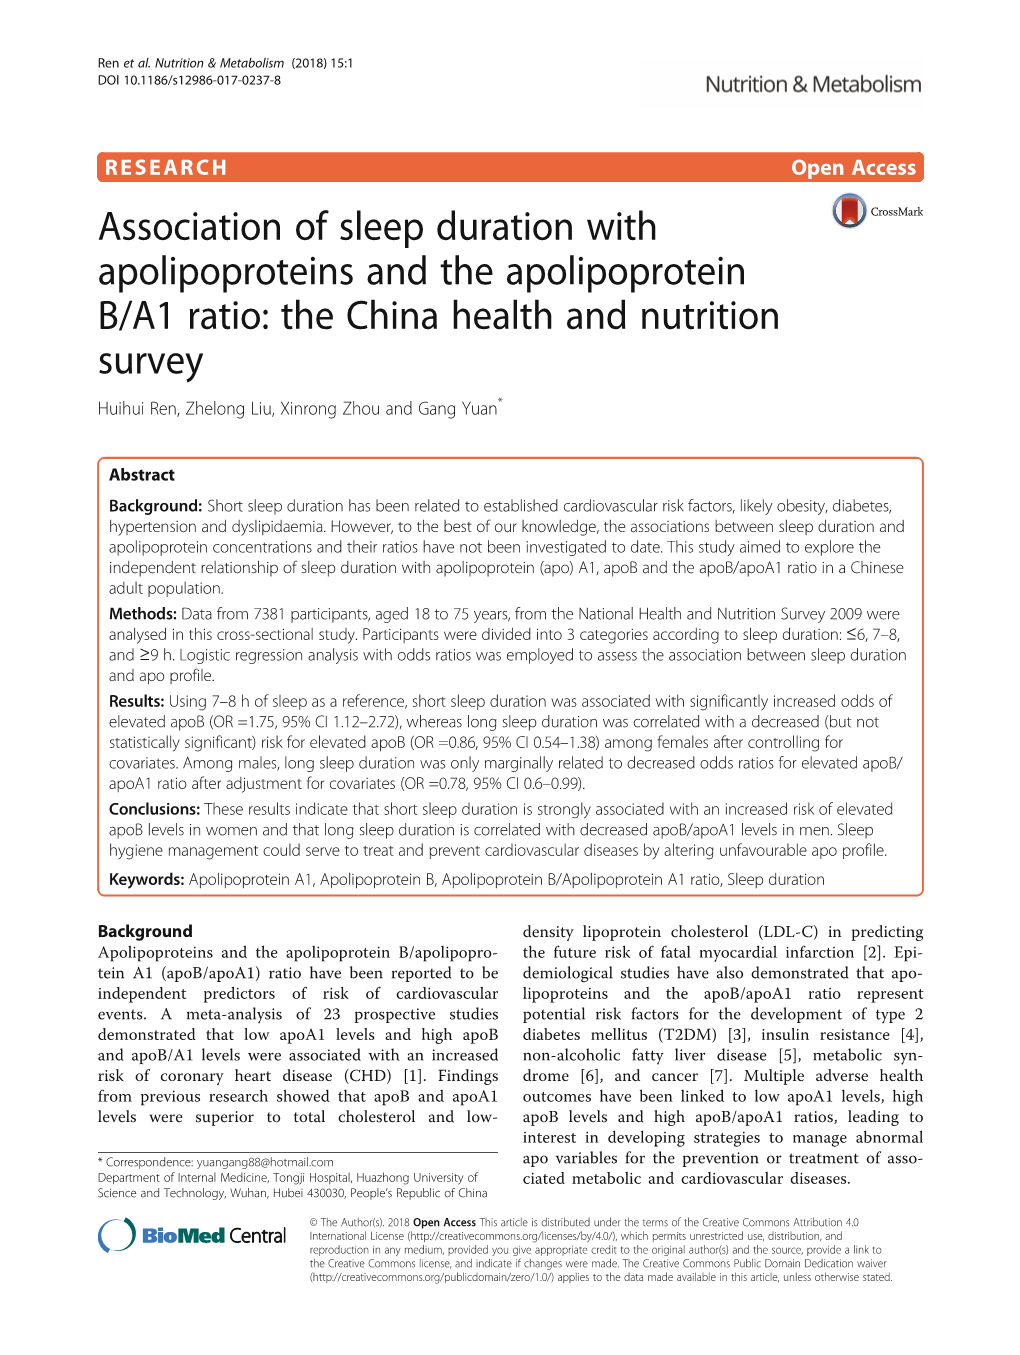 Association of Sleep Duration with Apolipoproteins and the Apolipoprotein B/A1 Ratio: the China Health and Nutrition Survey